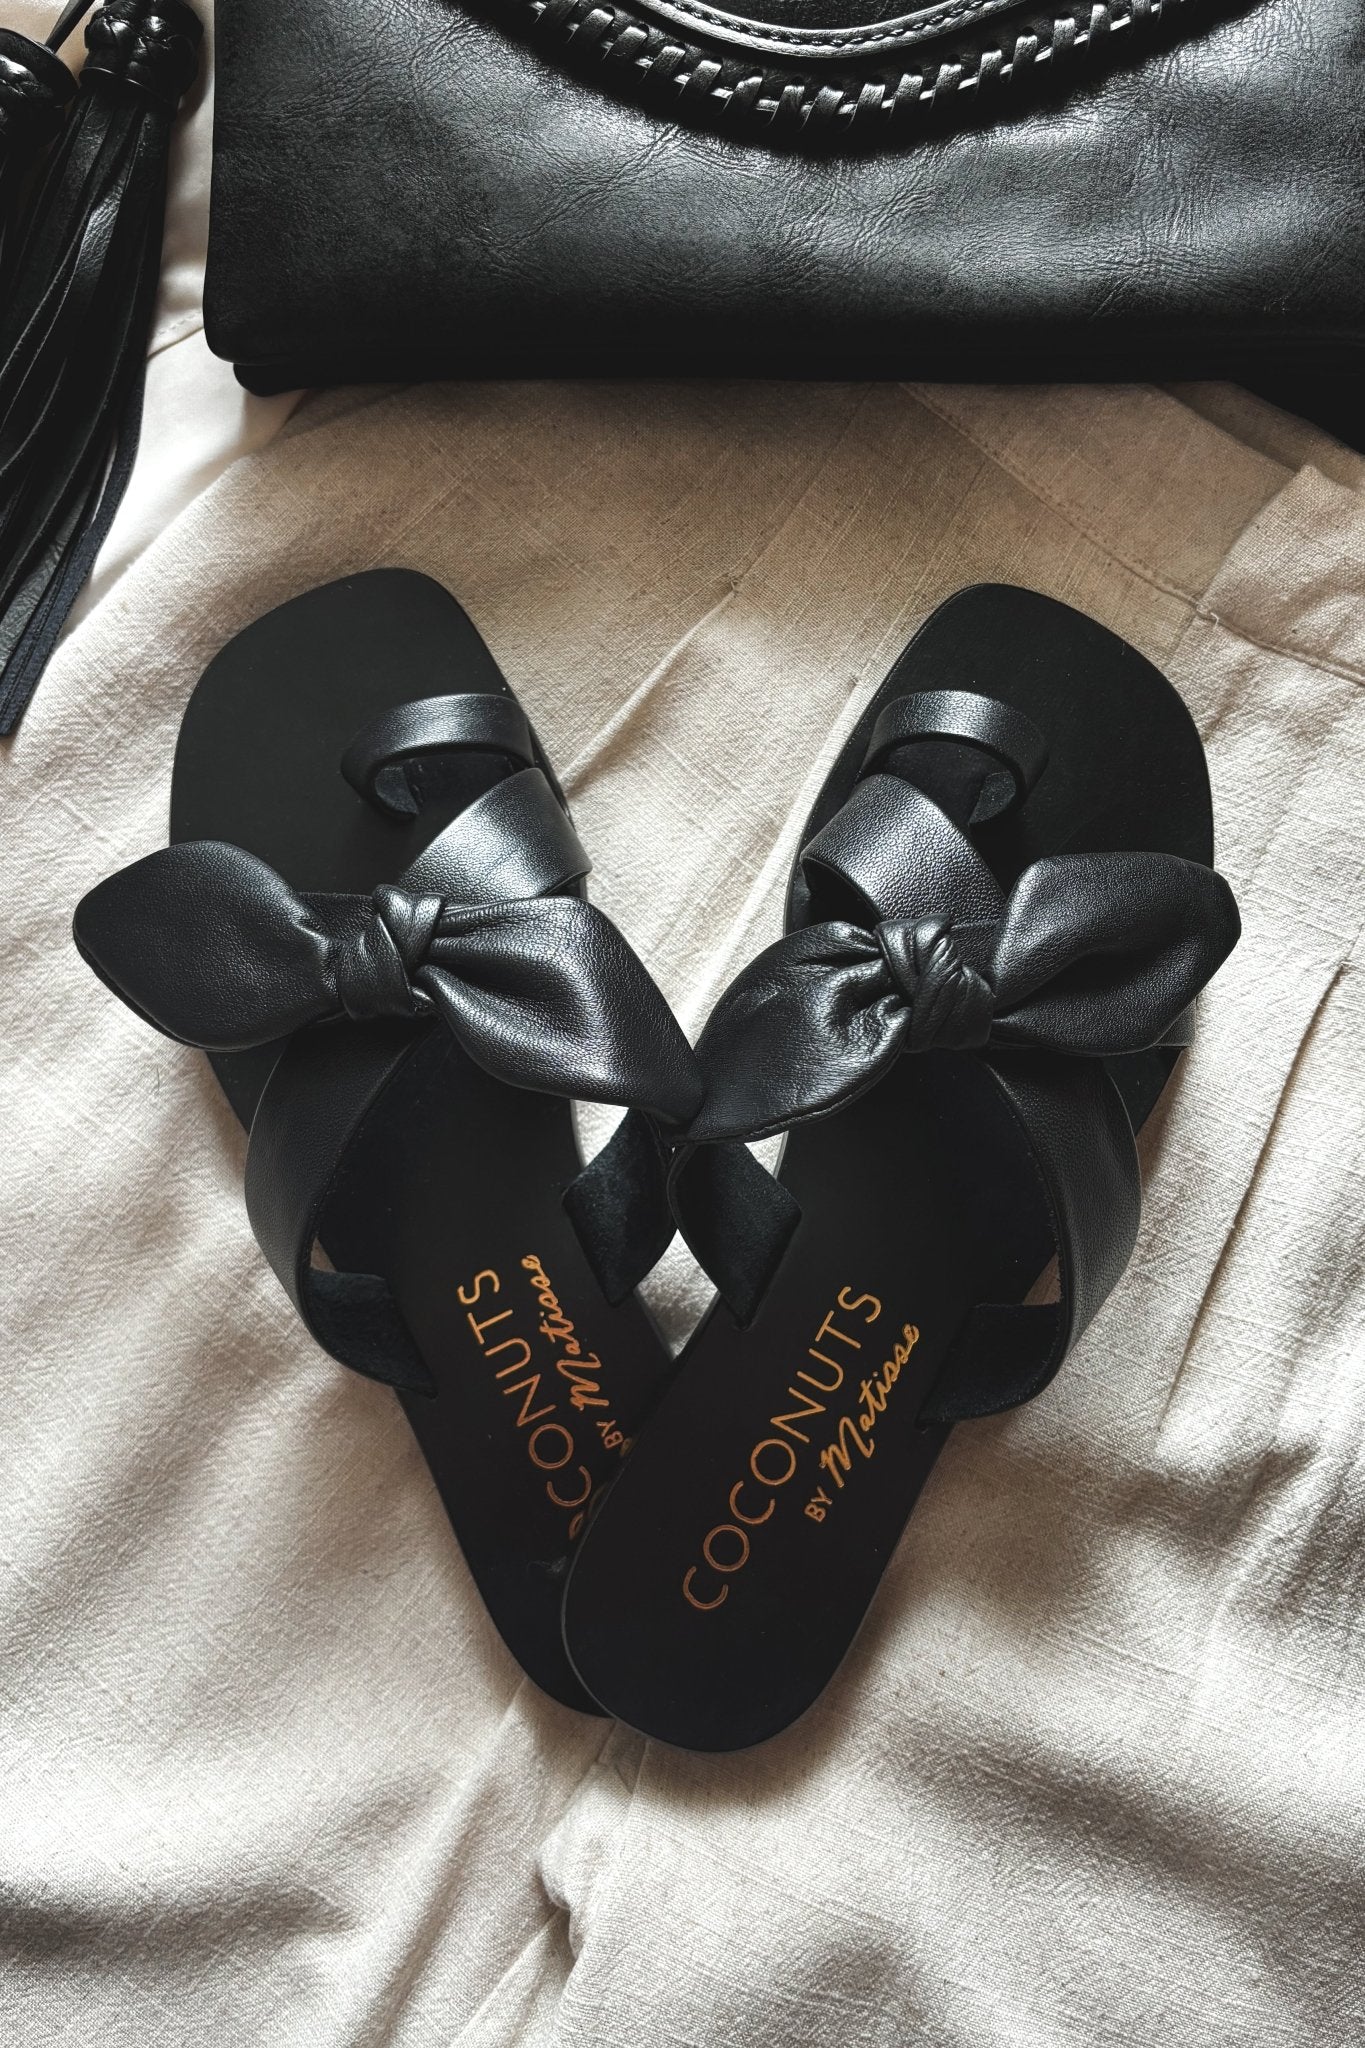 Women's Bow Knot Chic Summer Sandals | Leather Shoes | Black - Women's Shoes - Blooming Daily